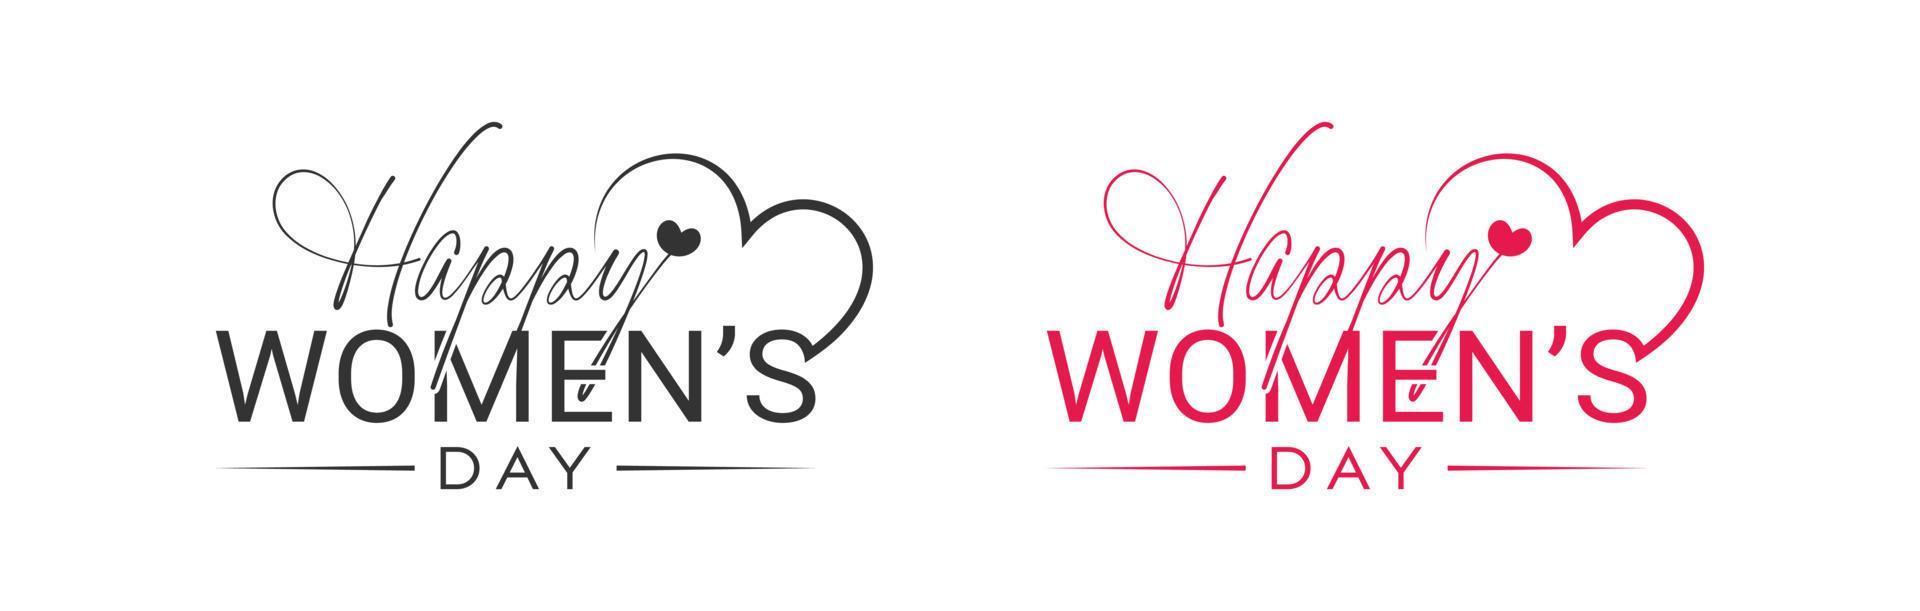 International lovely Happy Women's Day Logo Design, 8 march happy women's day with love vector logo